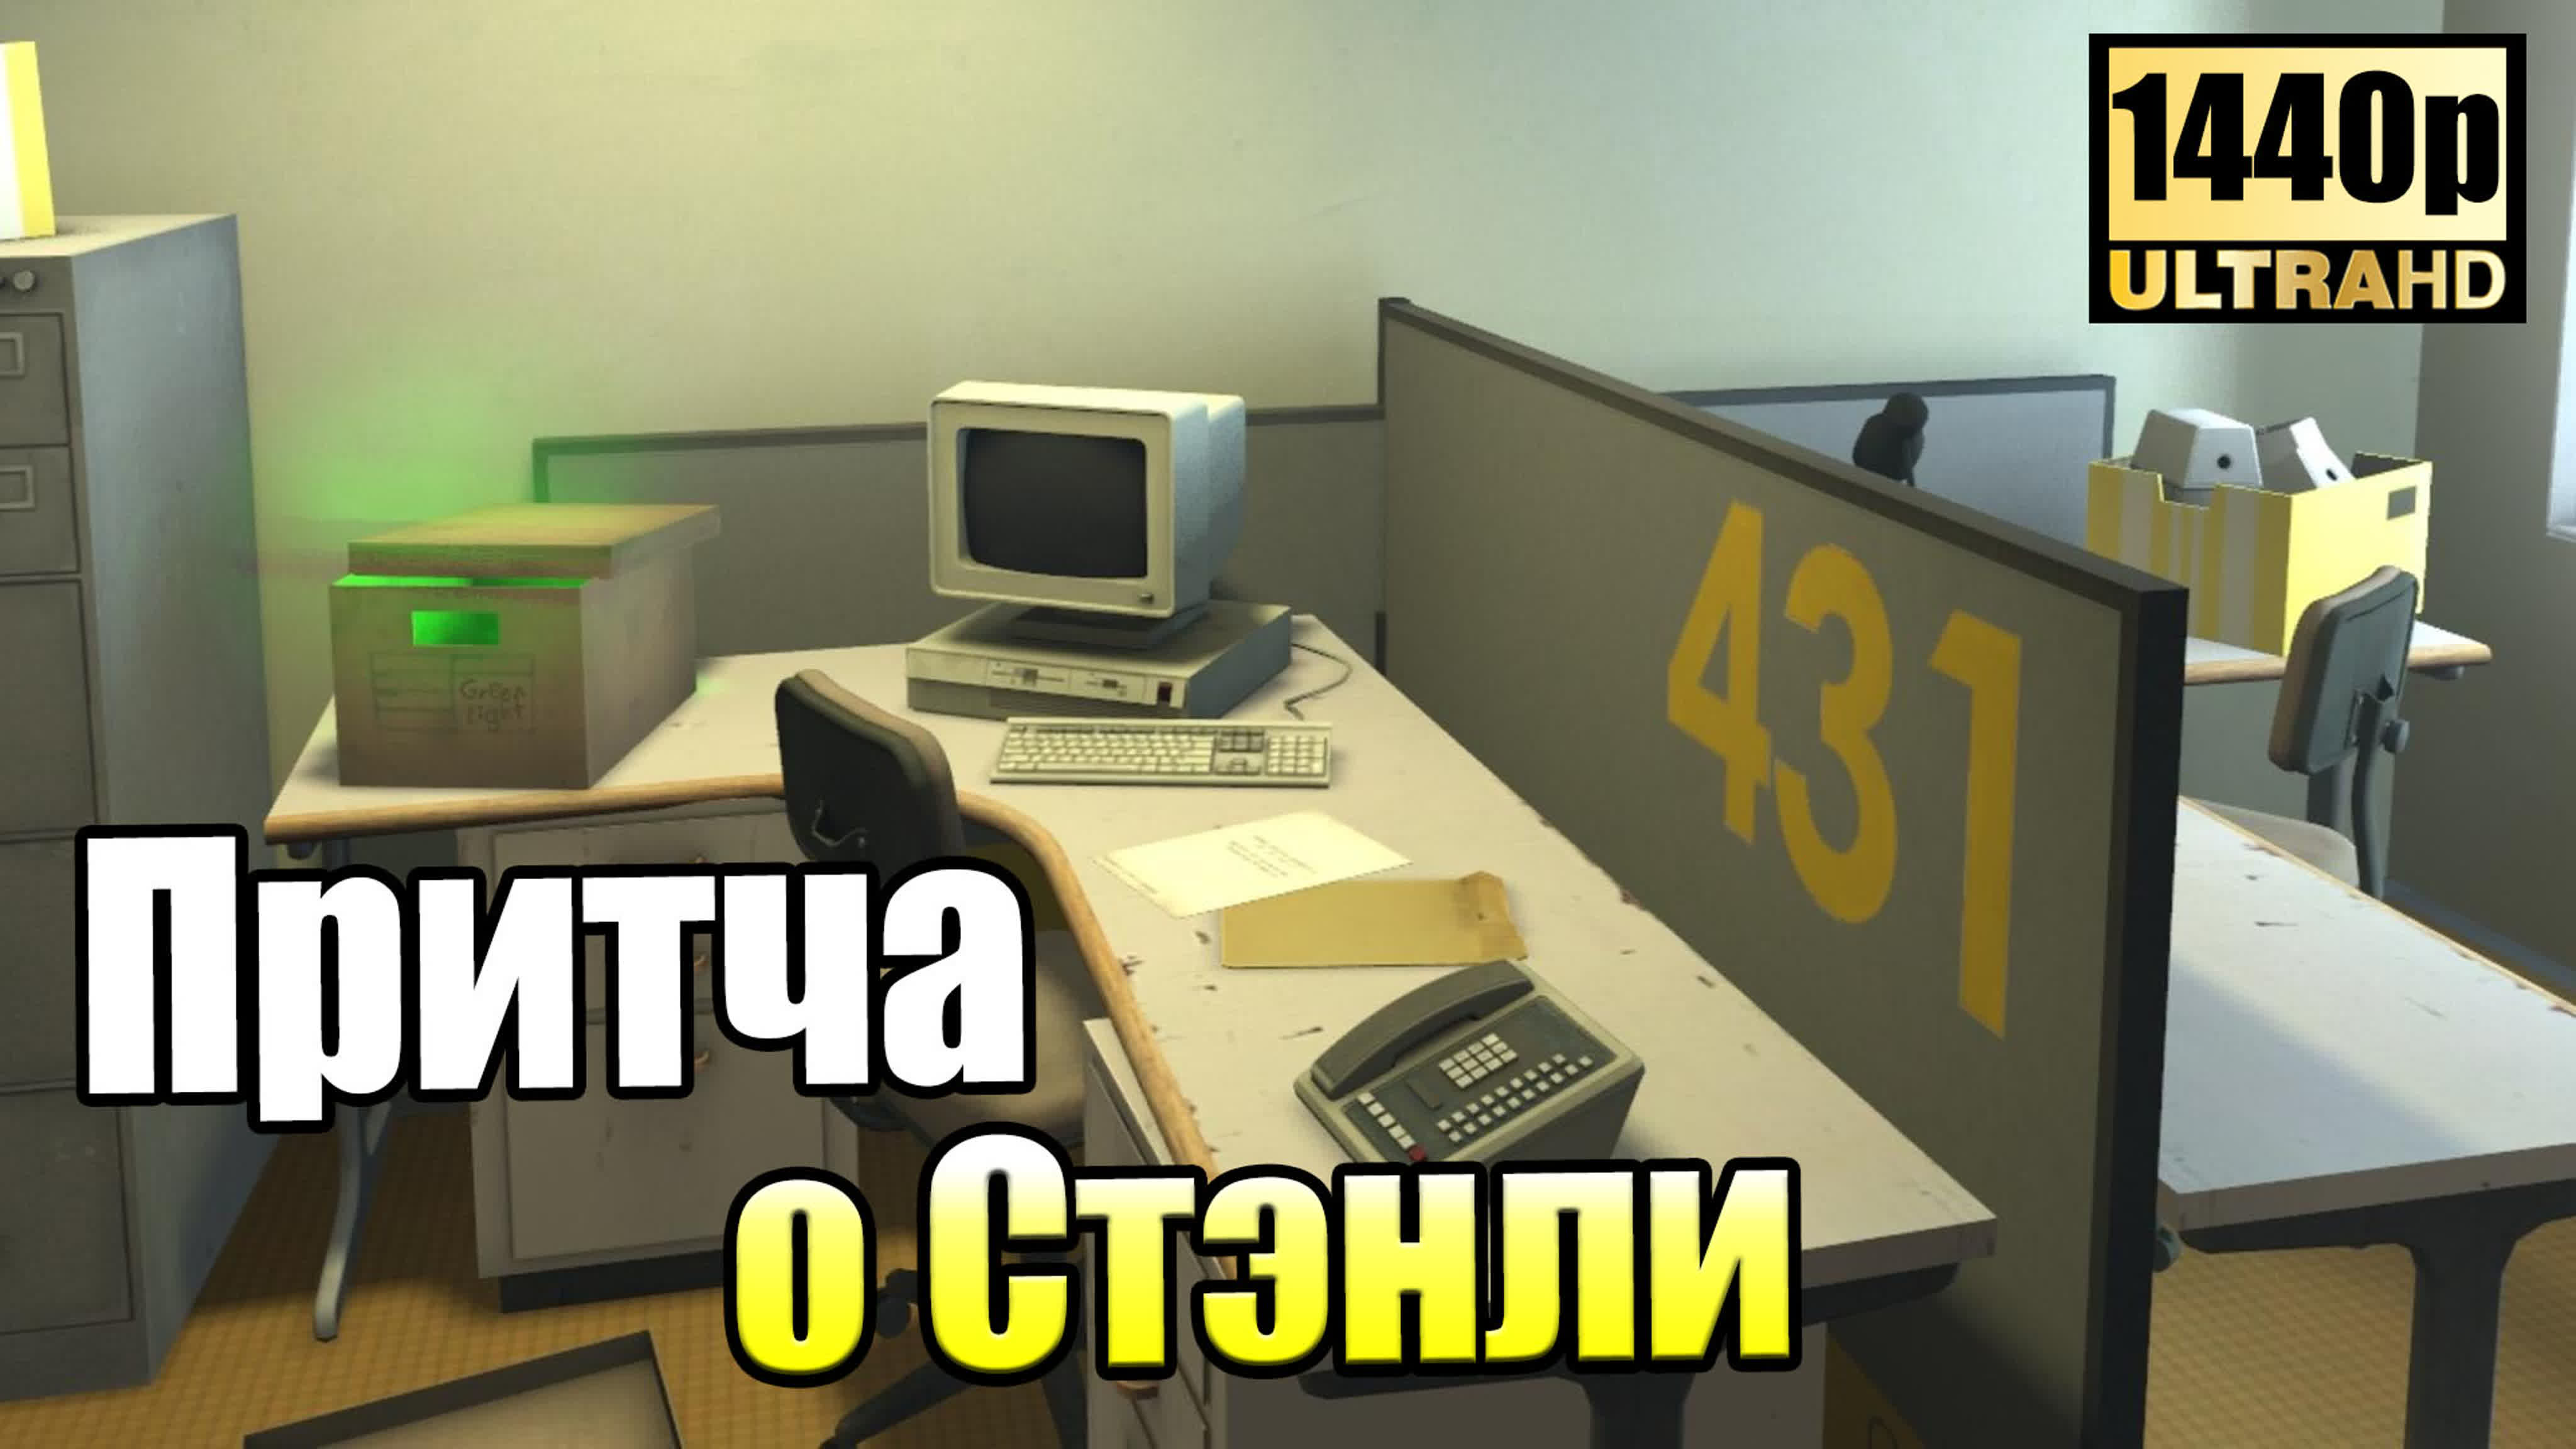 Stanley Parable (PC)